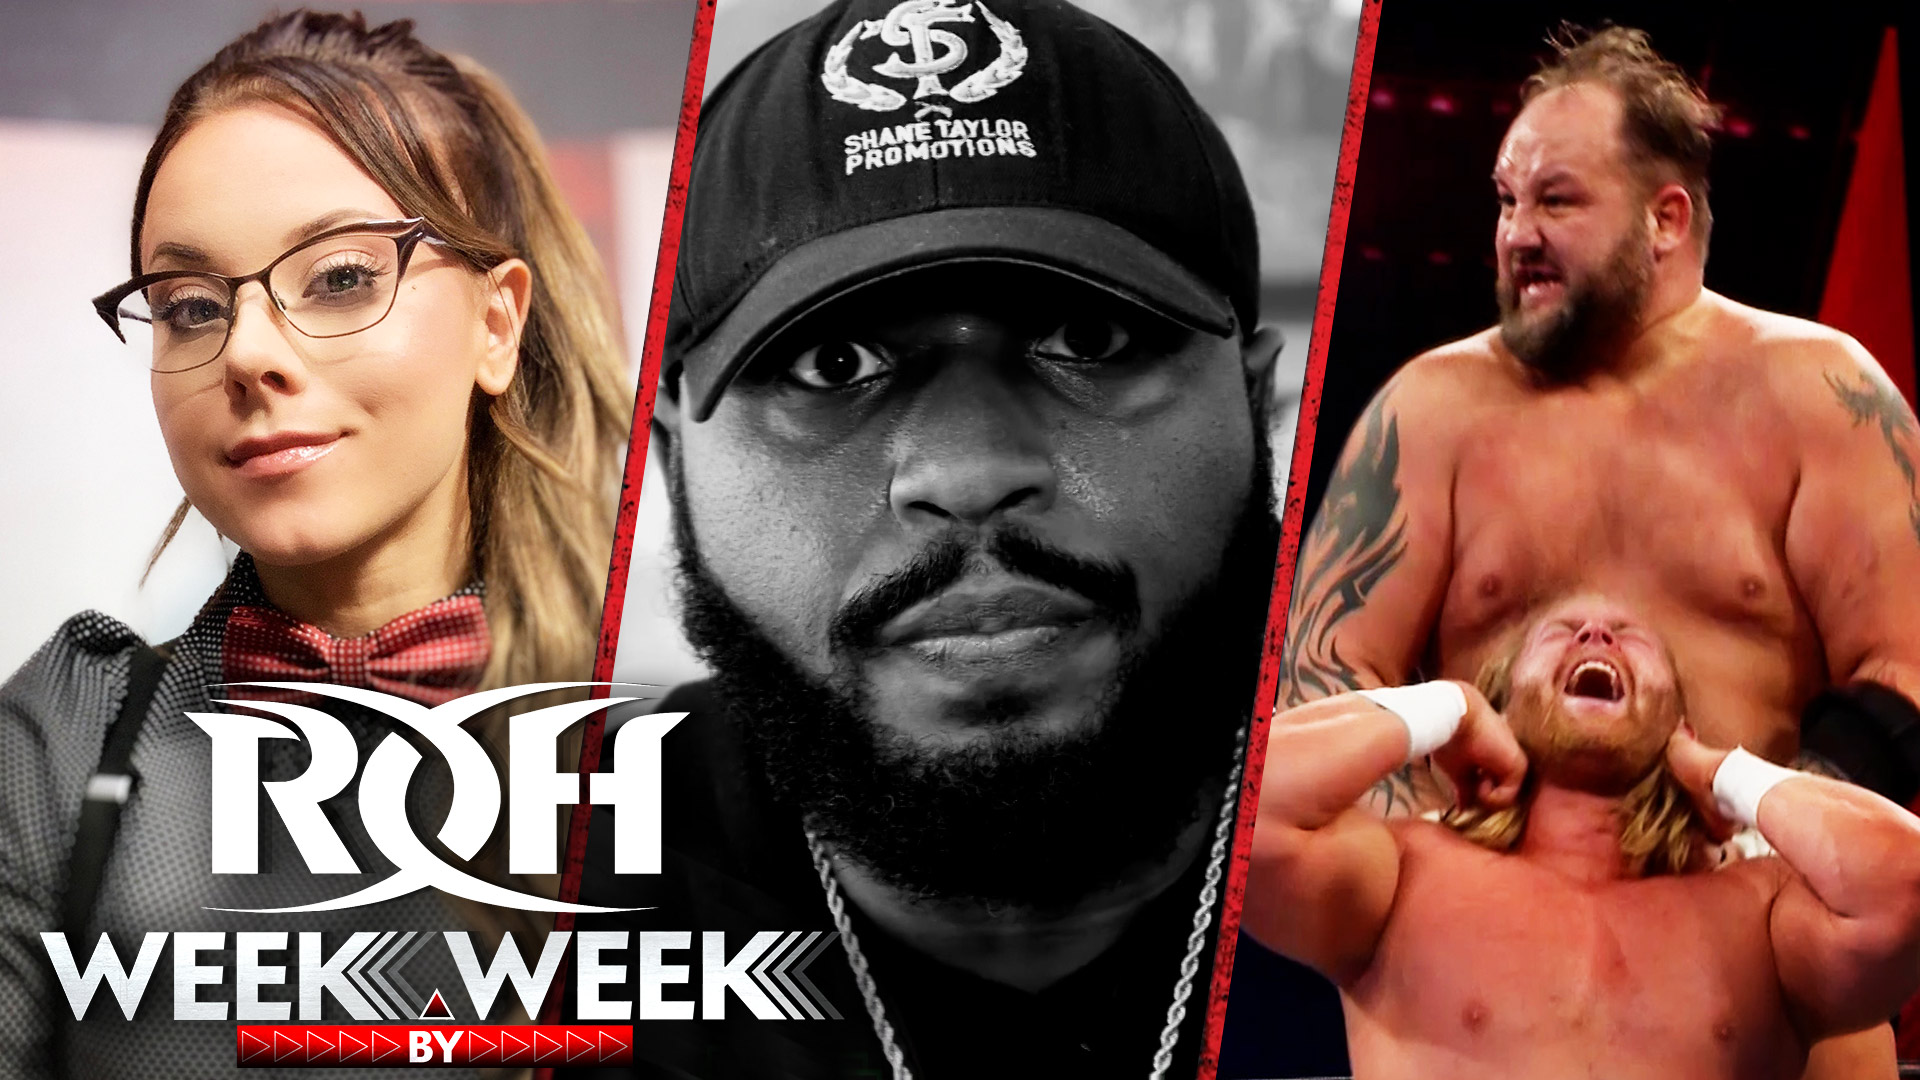 A Huge Announcement and Shane Taylor Breaks His Silence on ROH Week By Week